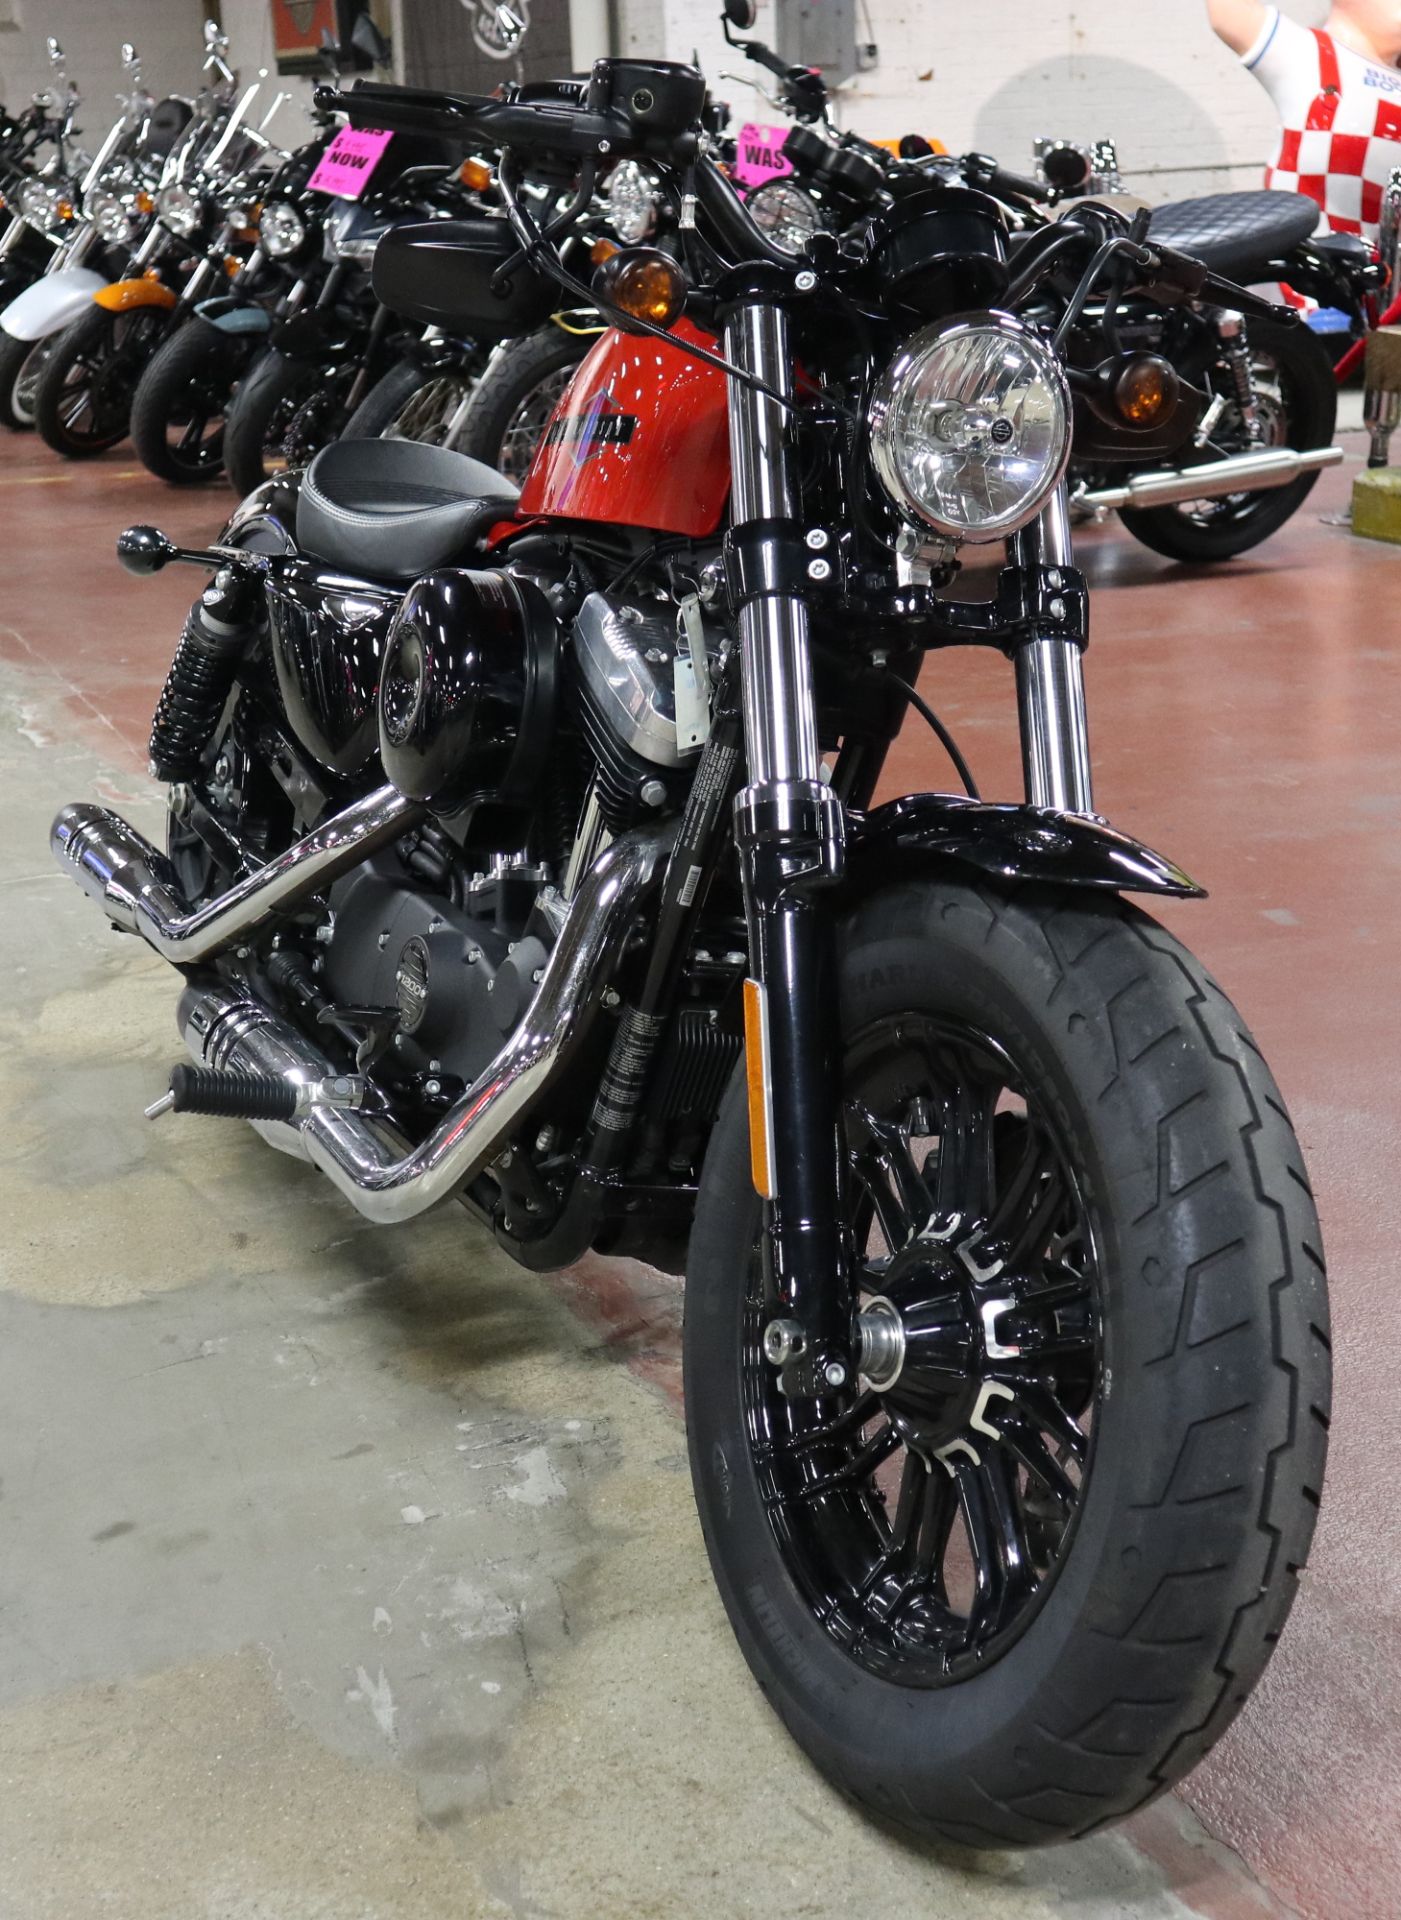 2020 Harley-Davidson Forty-Eight® in New London, Connecticut - Photo 2